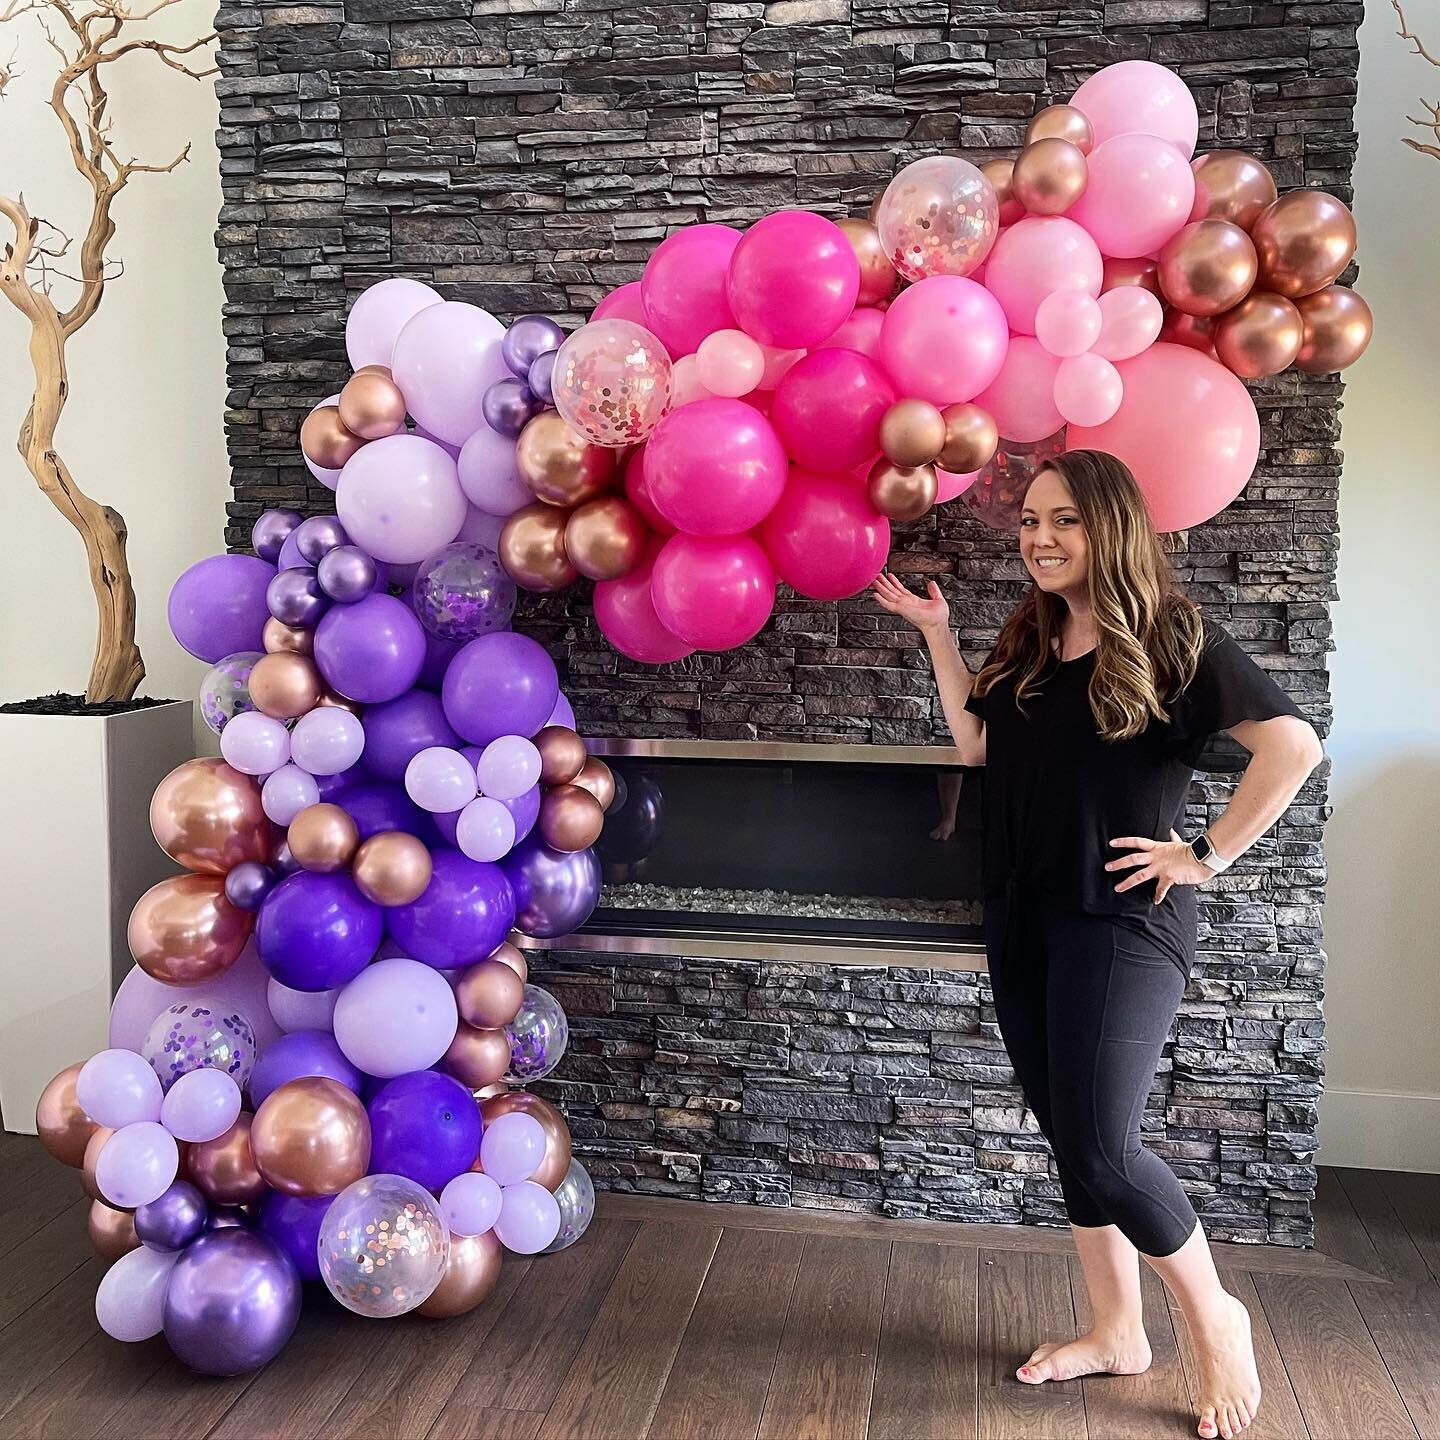 Balloon Garlands 🎉

This weekend we designed and installed this beauty for one of our clients. Balloons are such a great addition to your event. We LOVE how this one turned out! 😍 
.
.
.
.
#allisongrayevents #calgarybuzz #yyc #canada #mycreativebiz